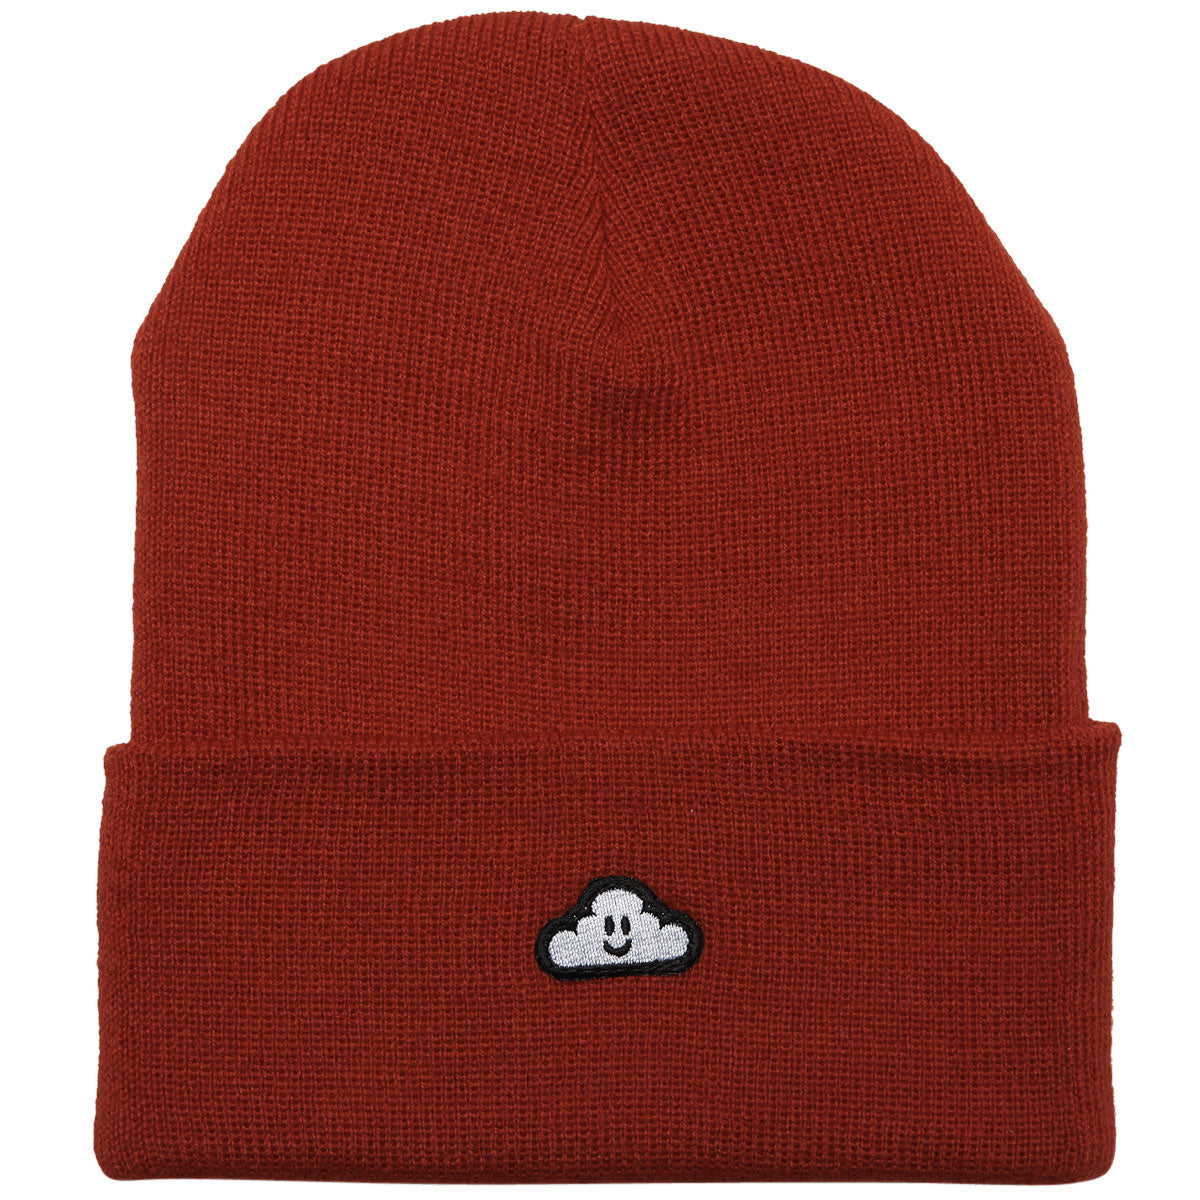 Thank You Cloudy Beanie - Red image 1